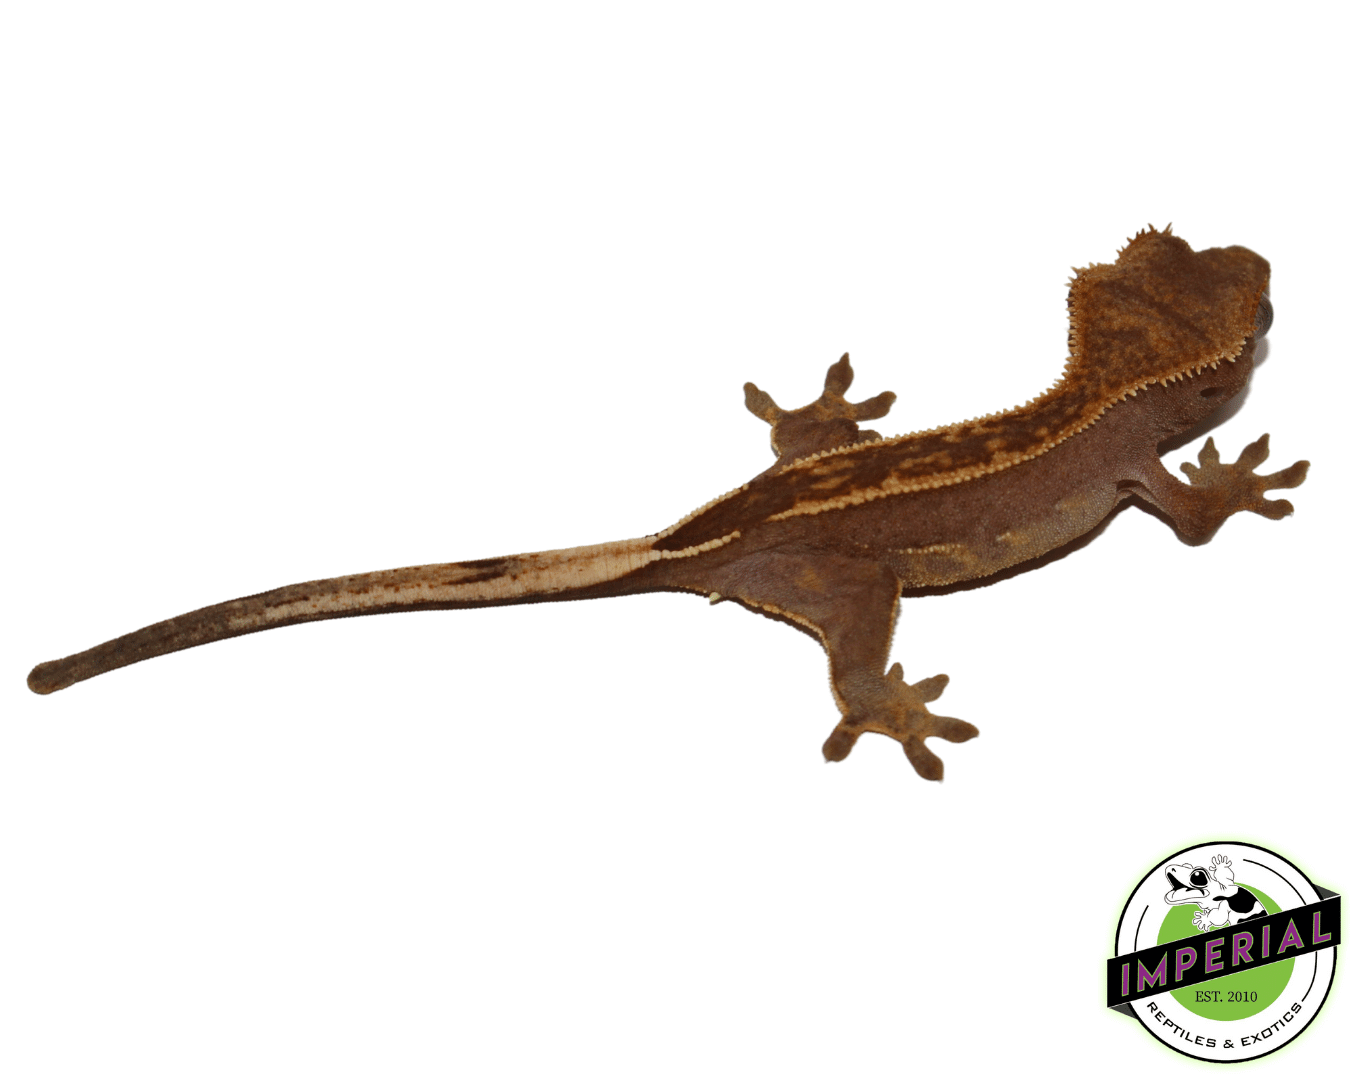 pinstripe crested gecko for sale, buy reptiles online